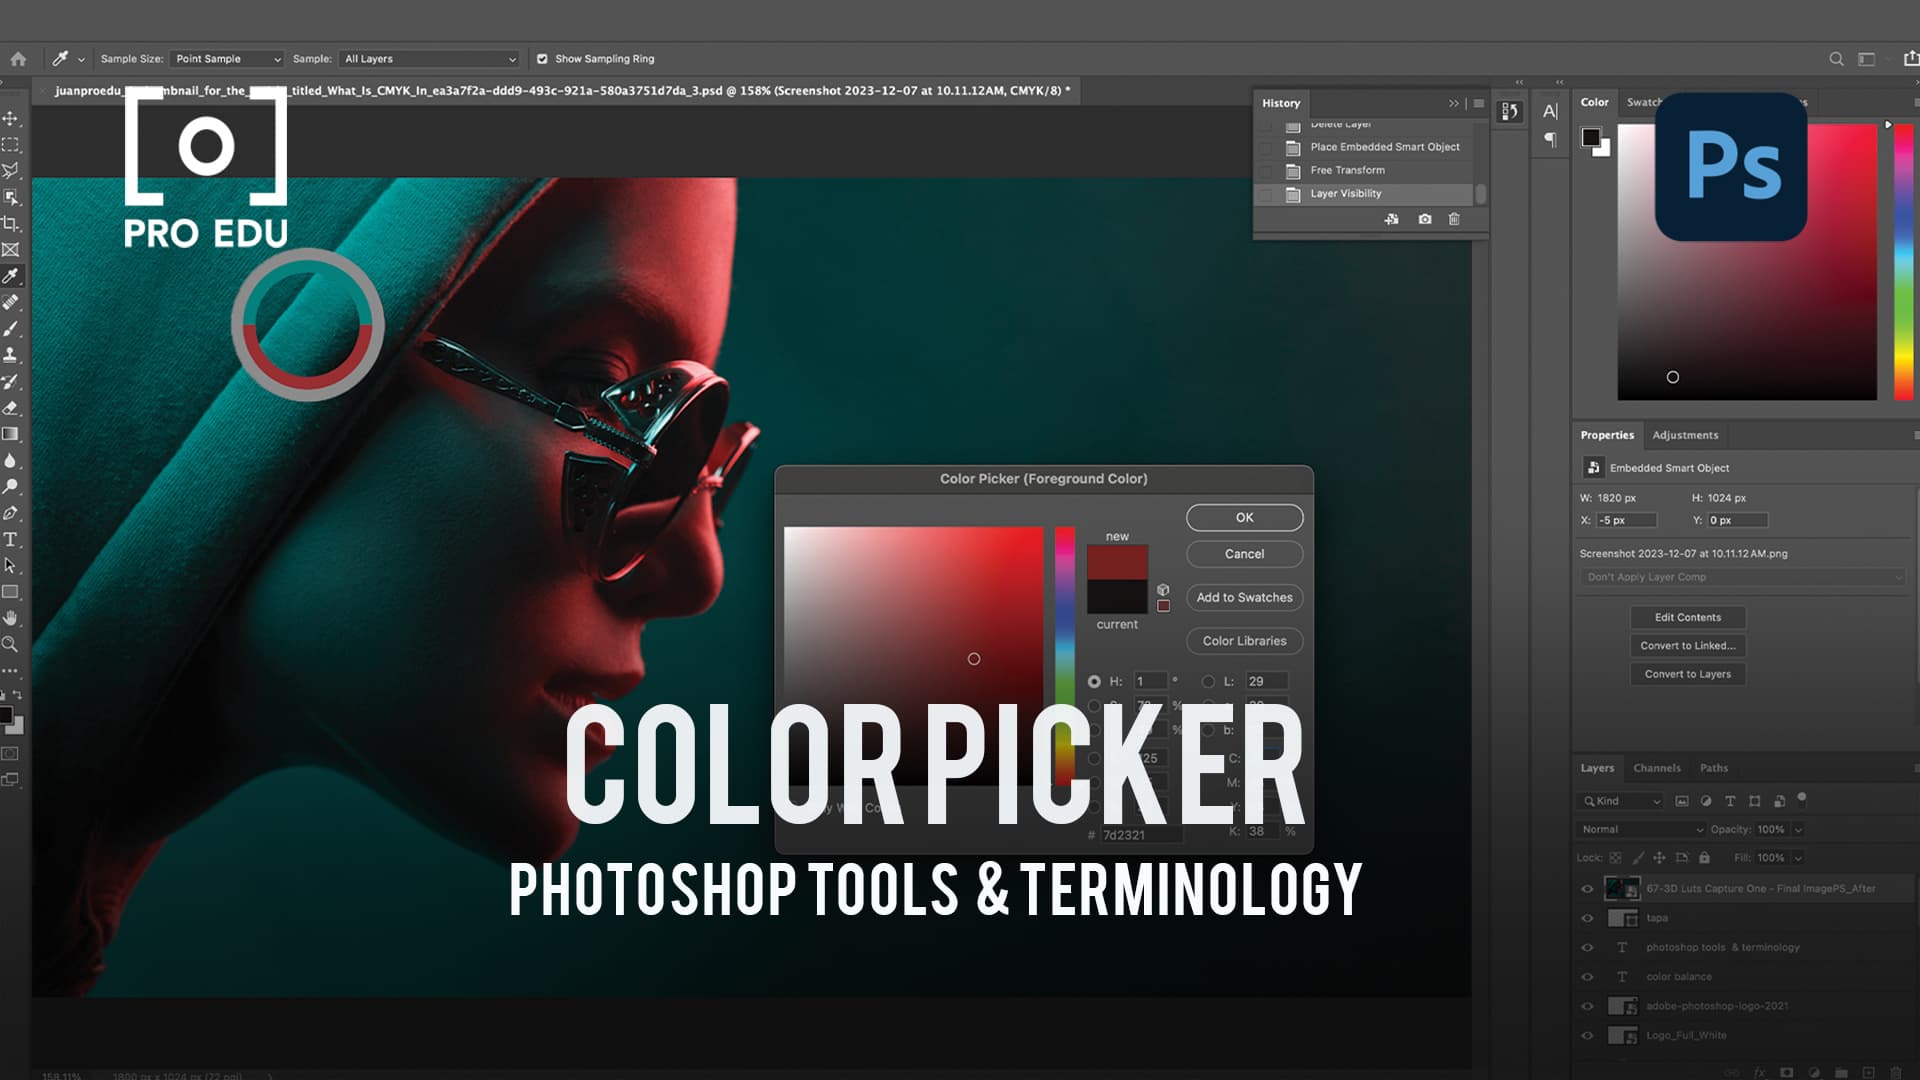 Color Picker Tool in Photoshop - PRO EDU Guide